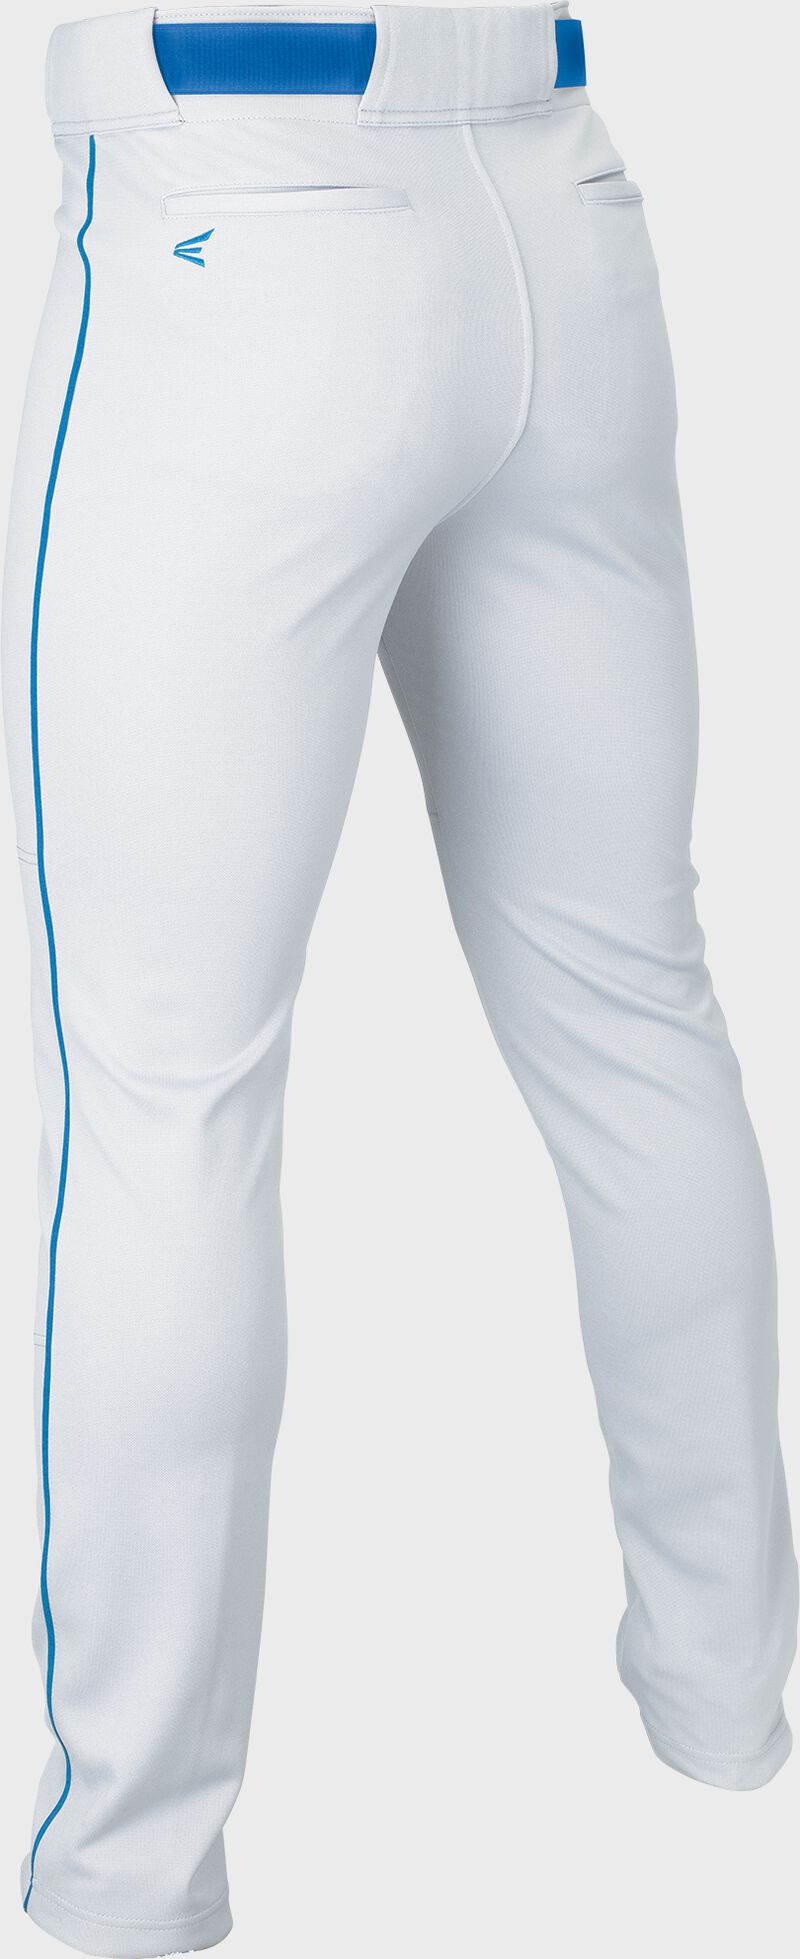 RIVAL+ PANT ADULT PIPED WHITE/ROYAL XL